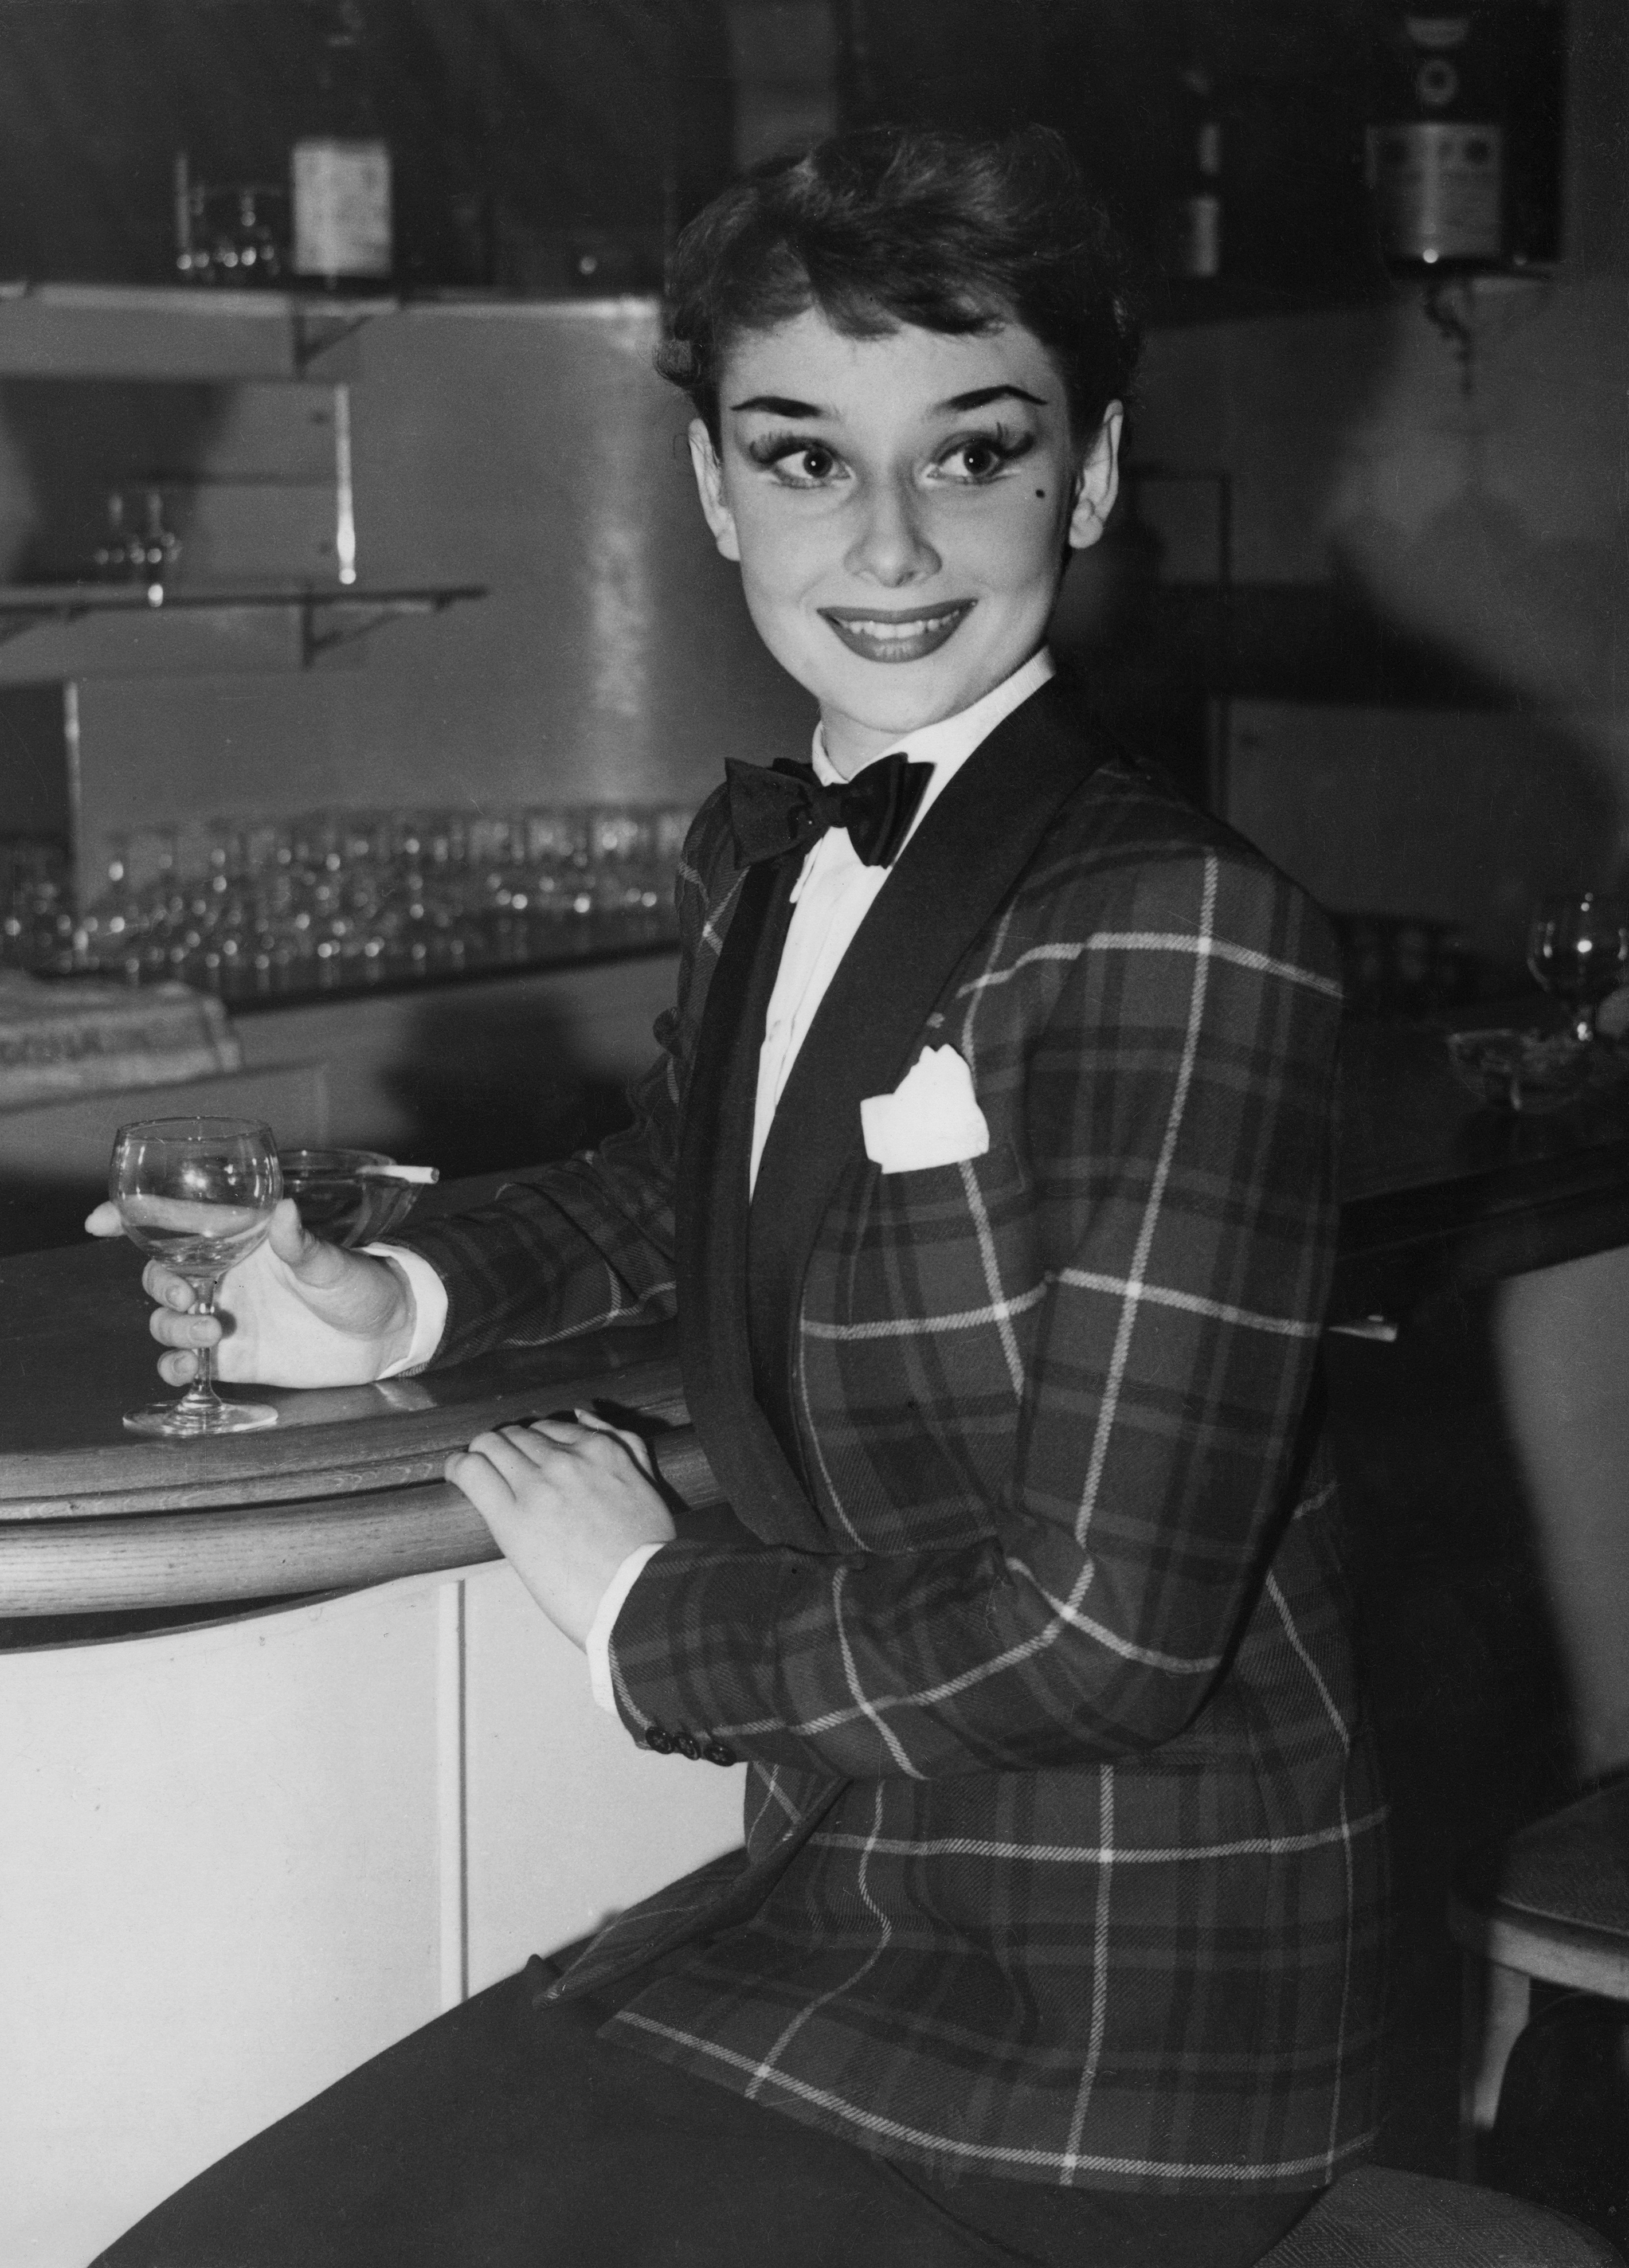 Smiling at a counter in a plaid jacket and bow tie and holding a wine glass